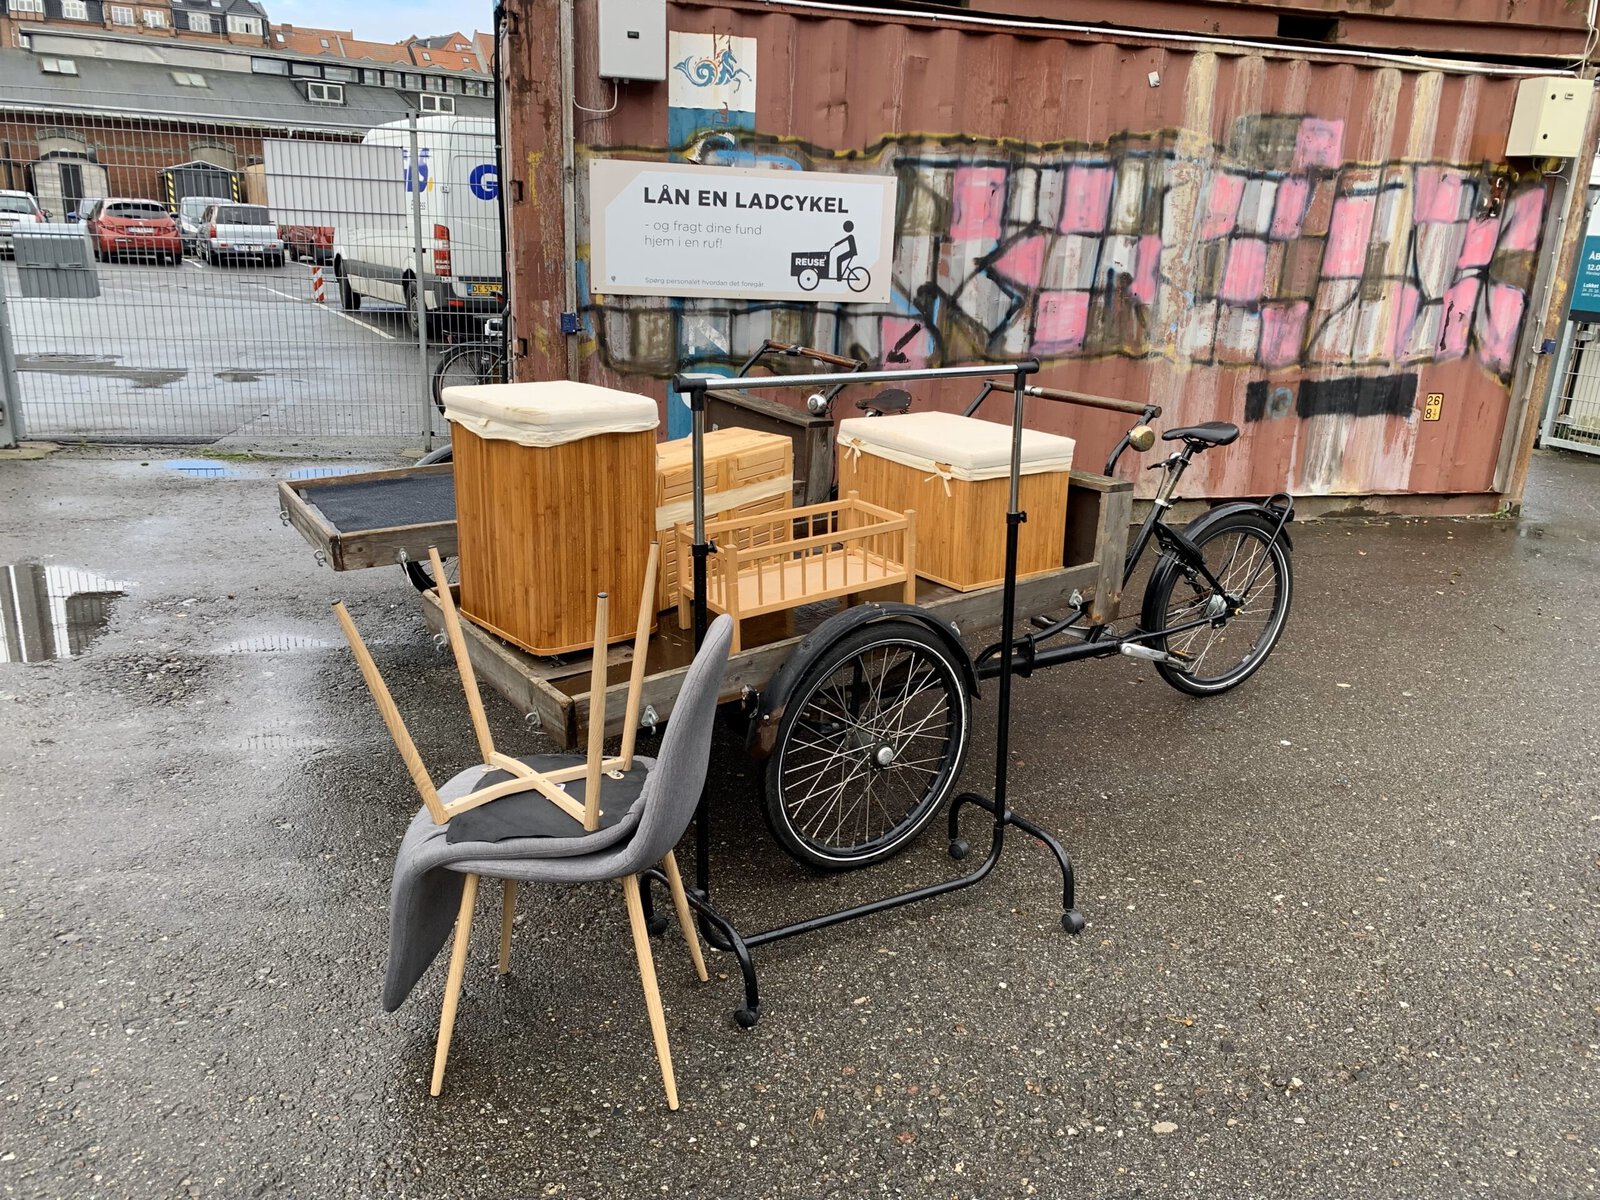 A cargo bike at a reuse center, carrying furniture.